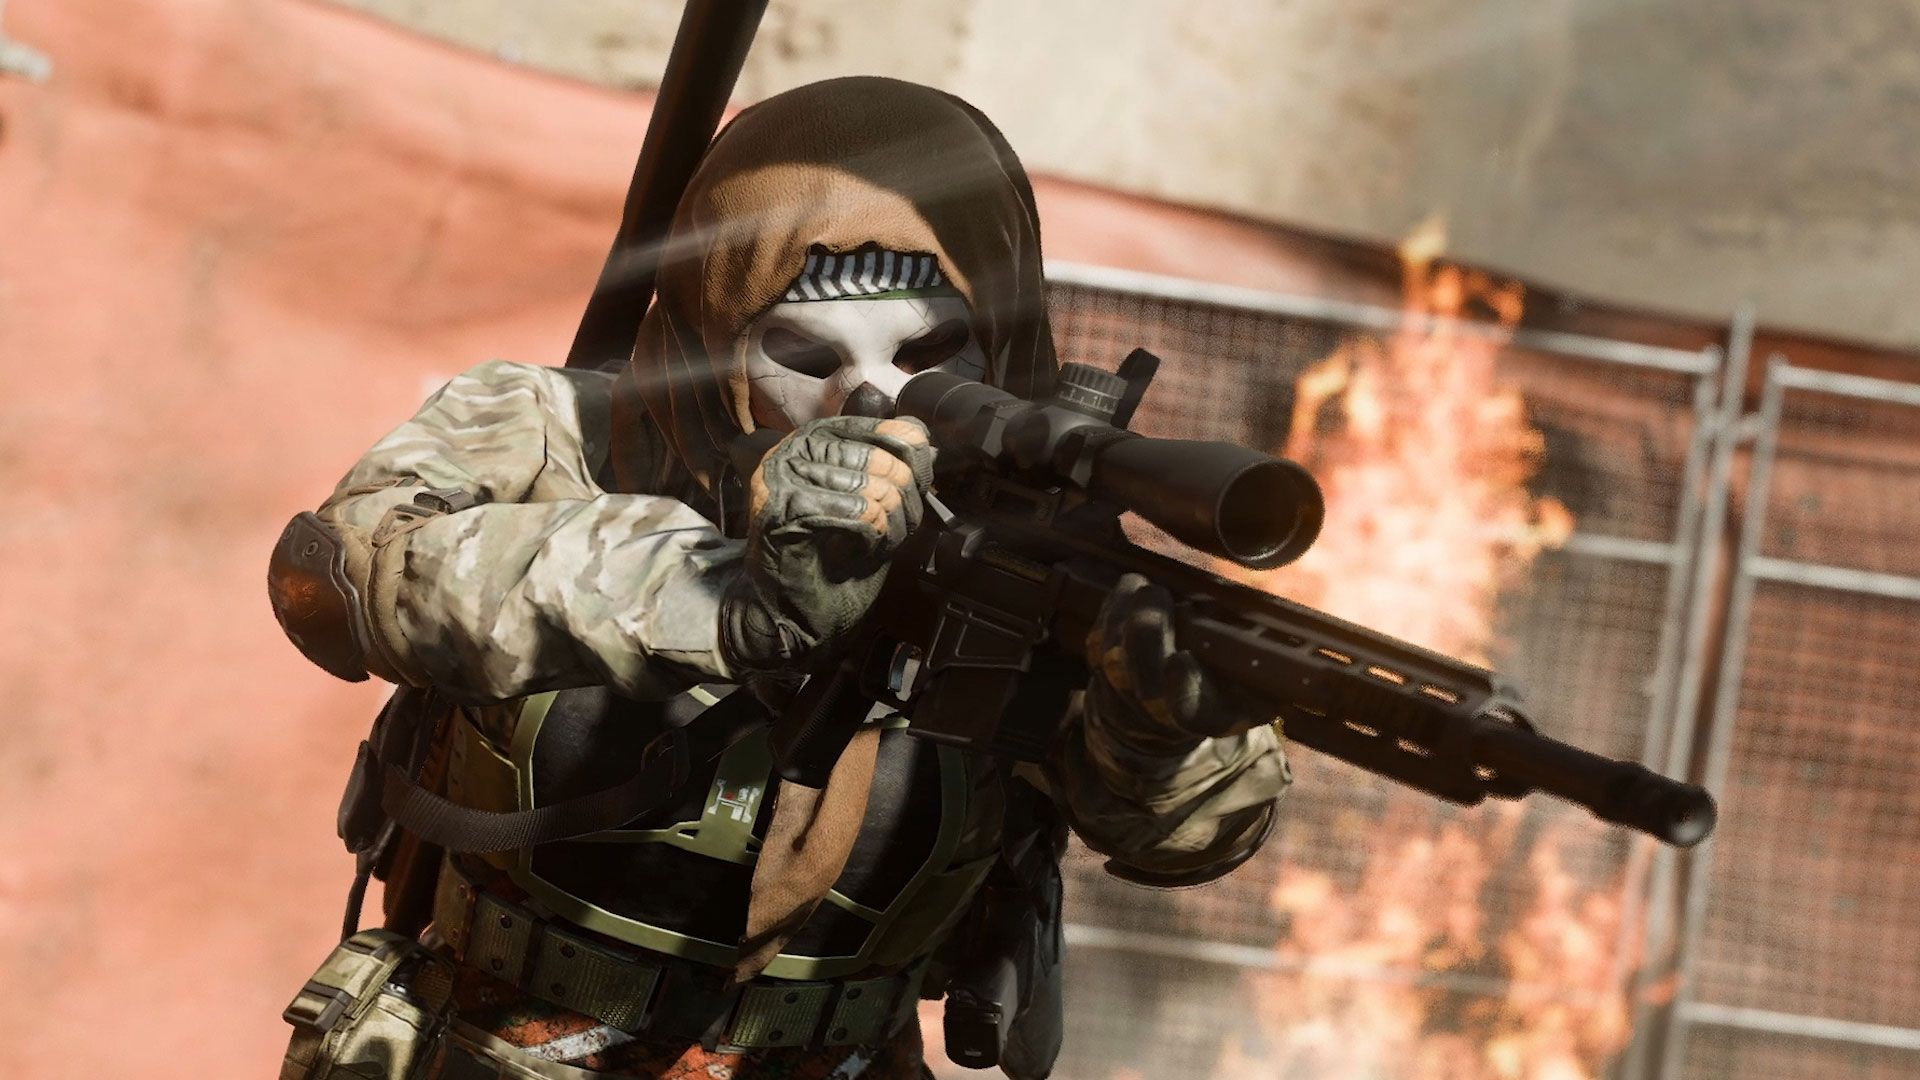 In this article, we are going to be covering how to fix MW2 error code 0x887a0005, so you can keep playing the game and enjoy all that it has to offer.